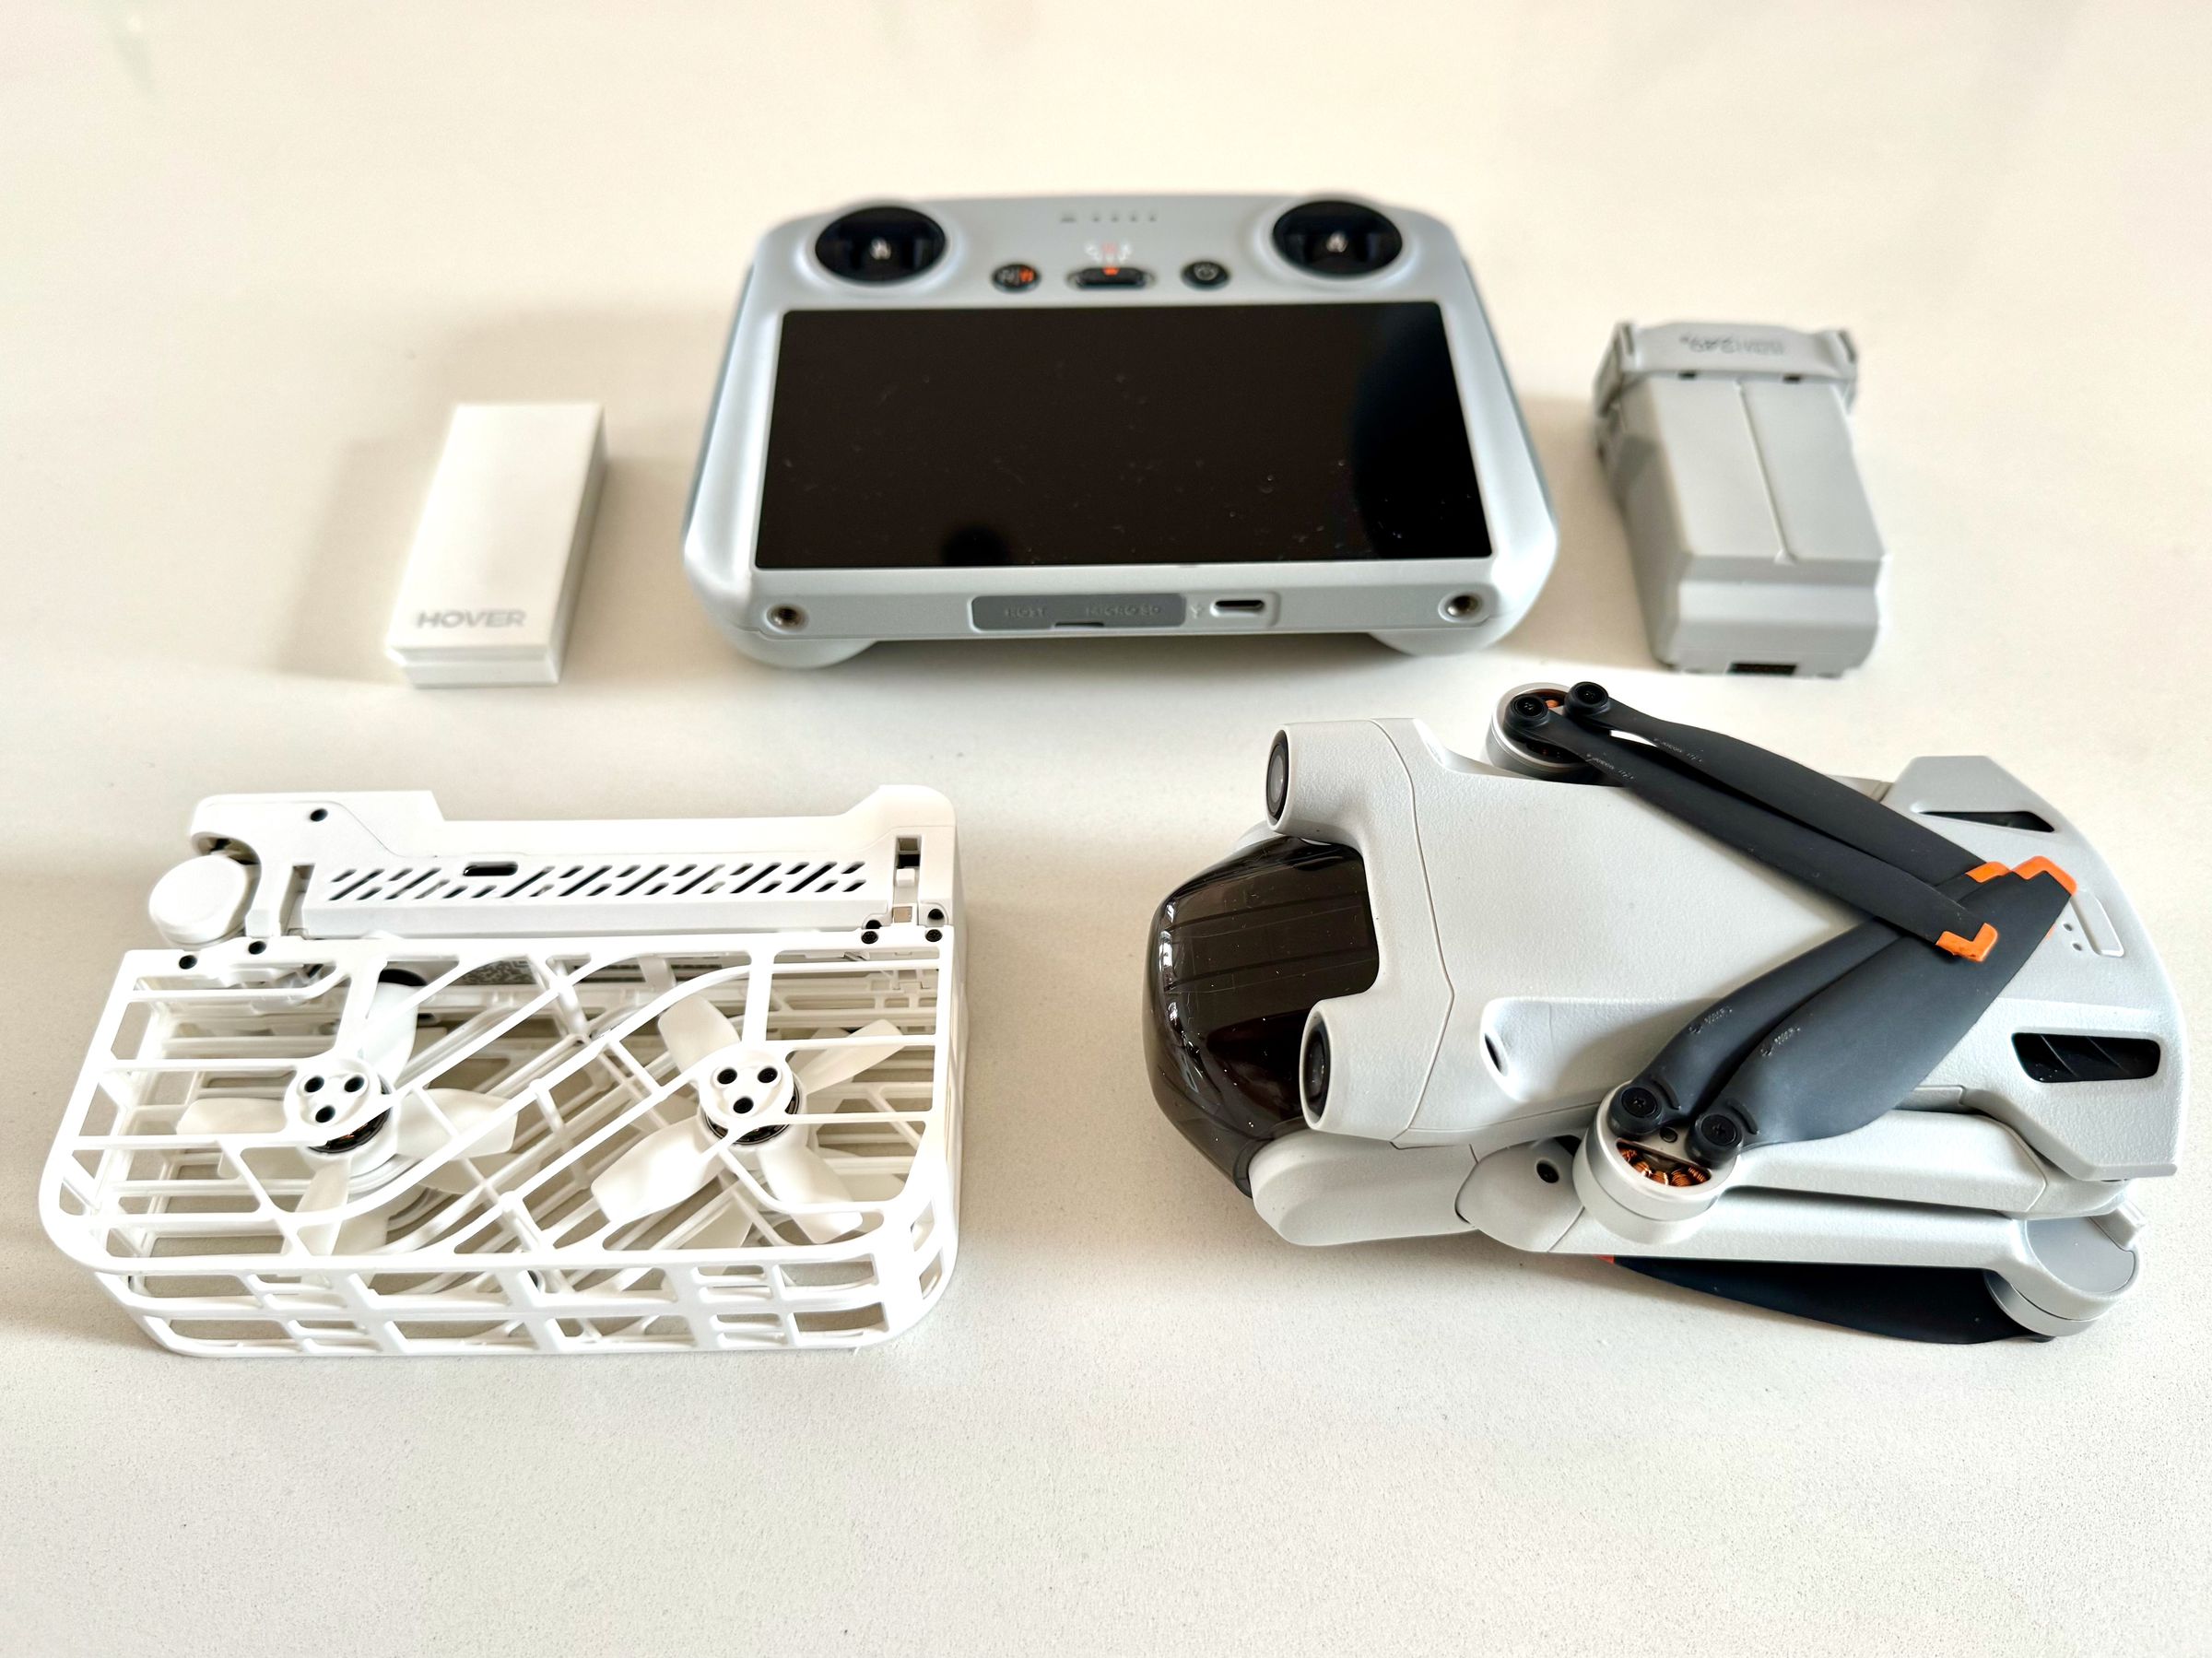 The collapsed HoverAir X1 and battery vs. DJI Mini 3 Pro, battery, and controller.